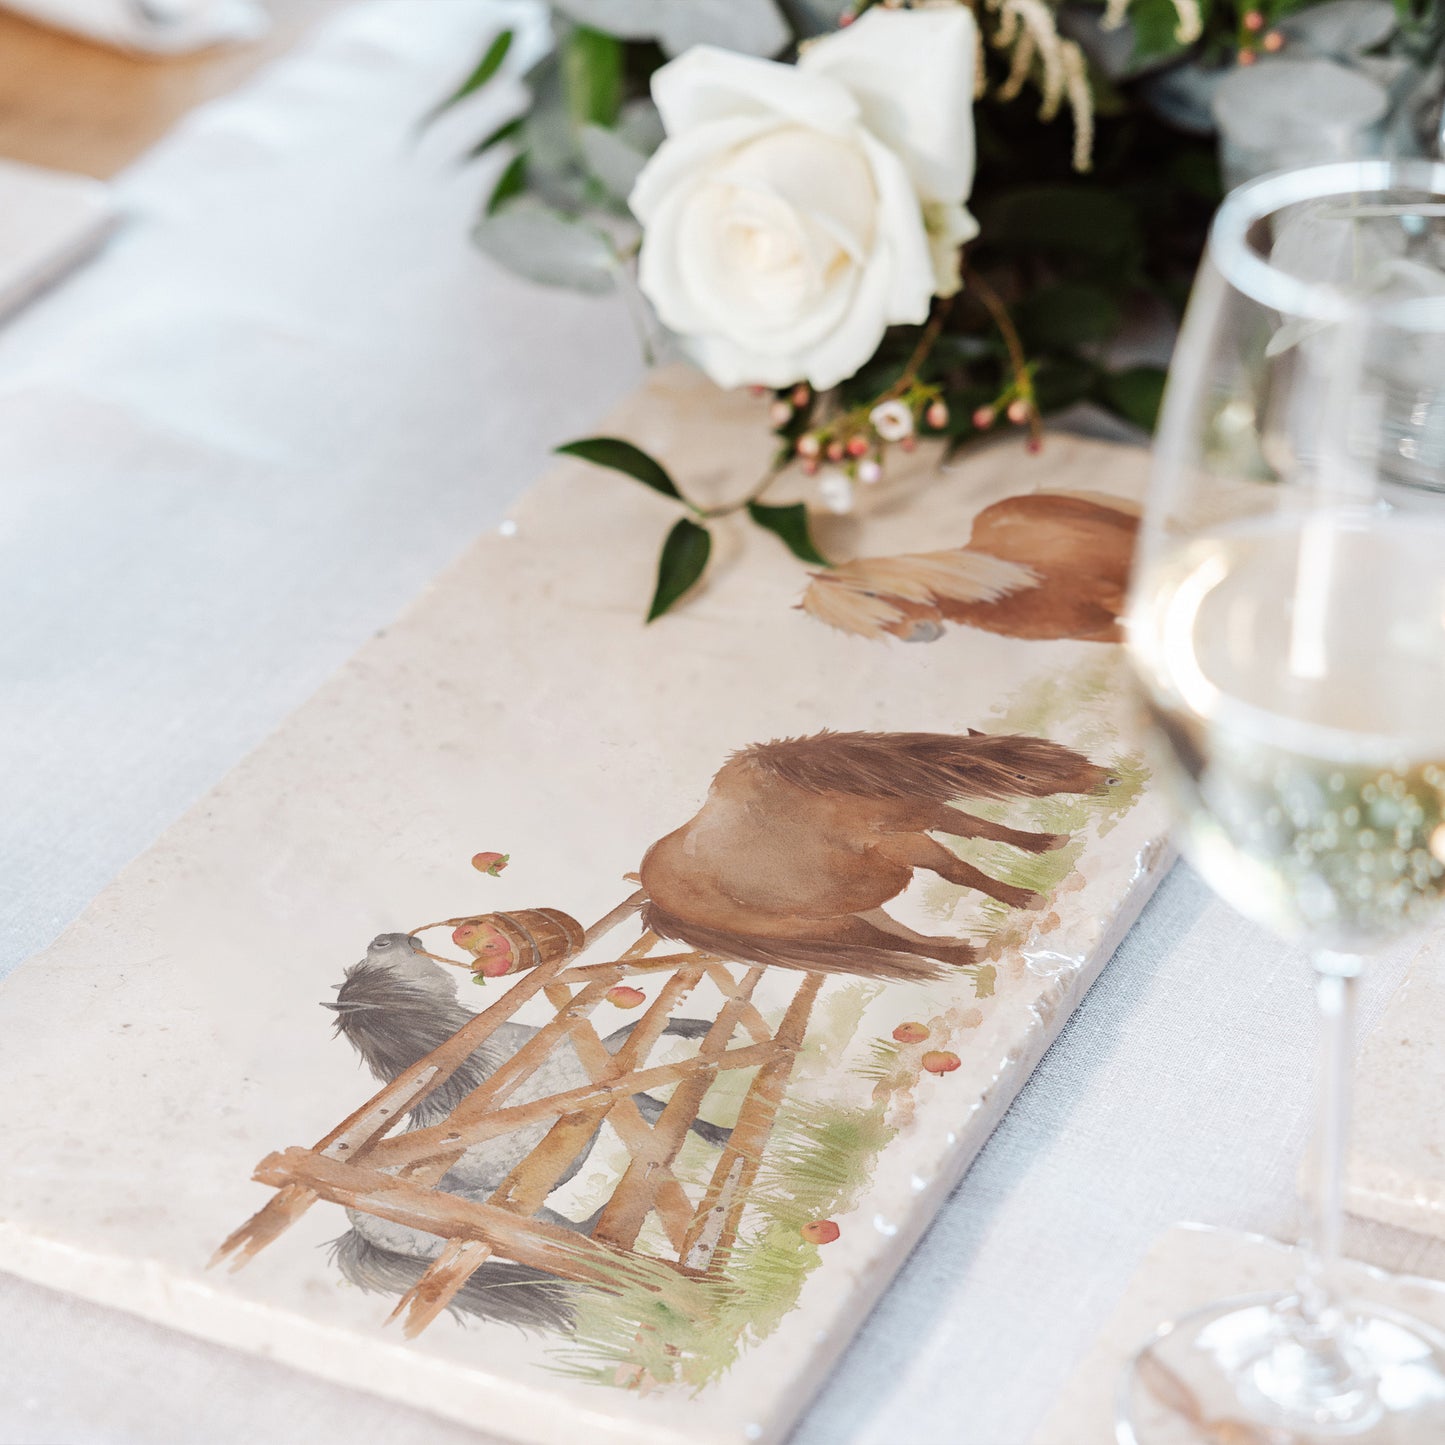 A rustic country dining table set with a multipurpose marble sharing platter featuring a watercolour design of three cheeky Shetland ponies stealing apples.